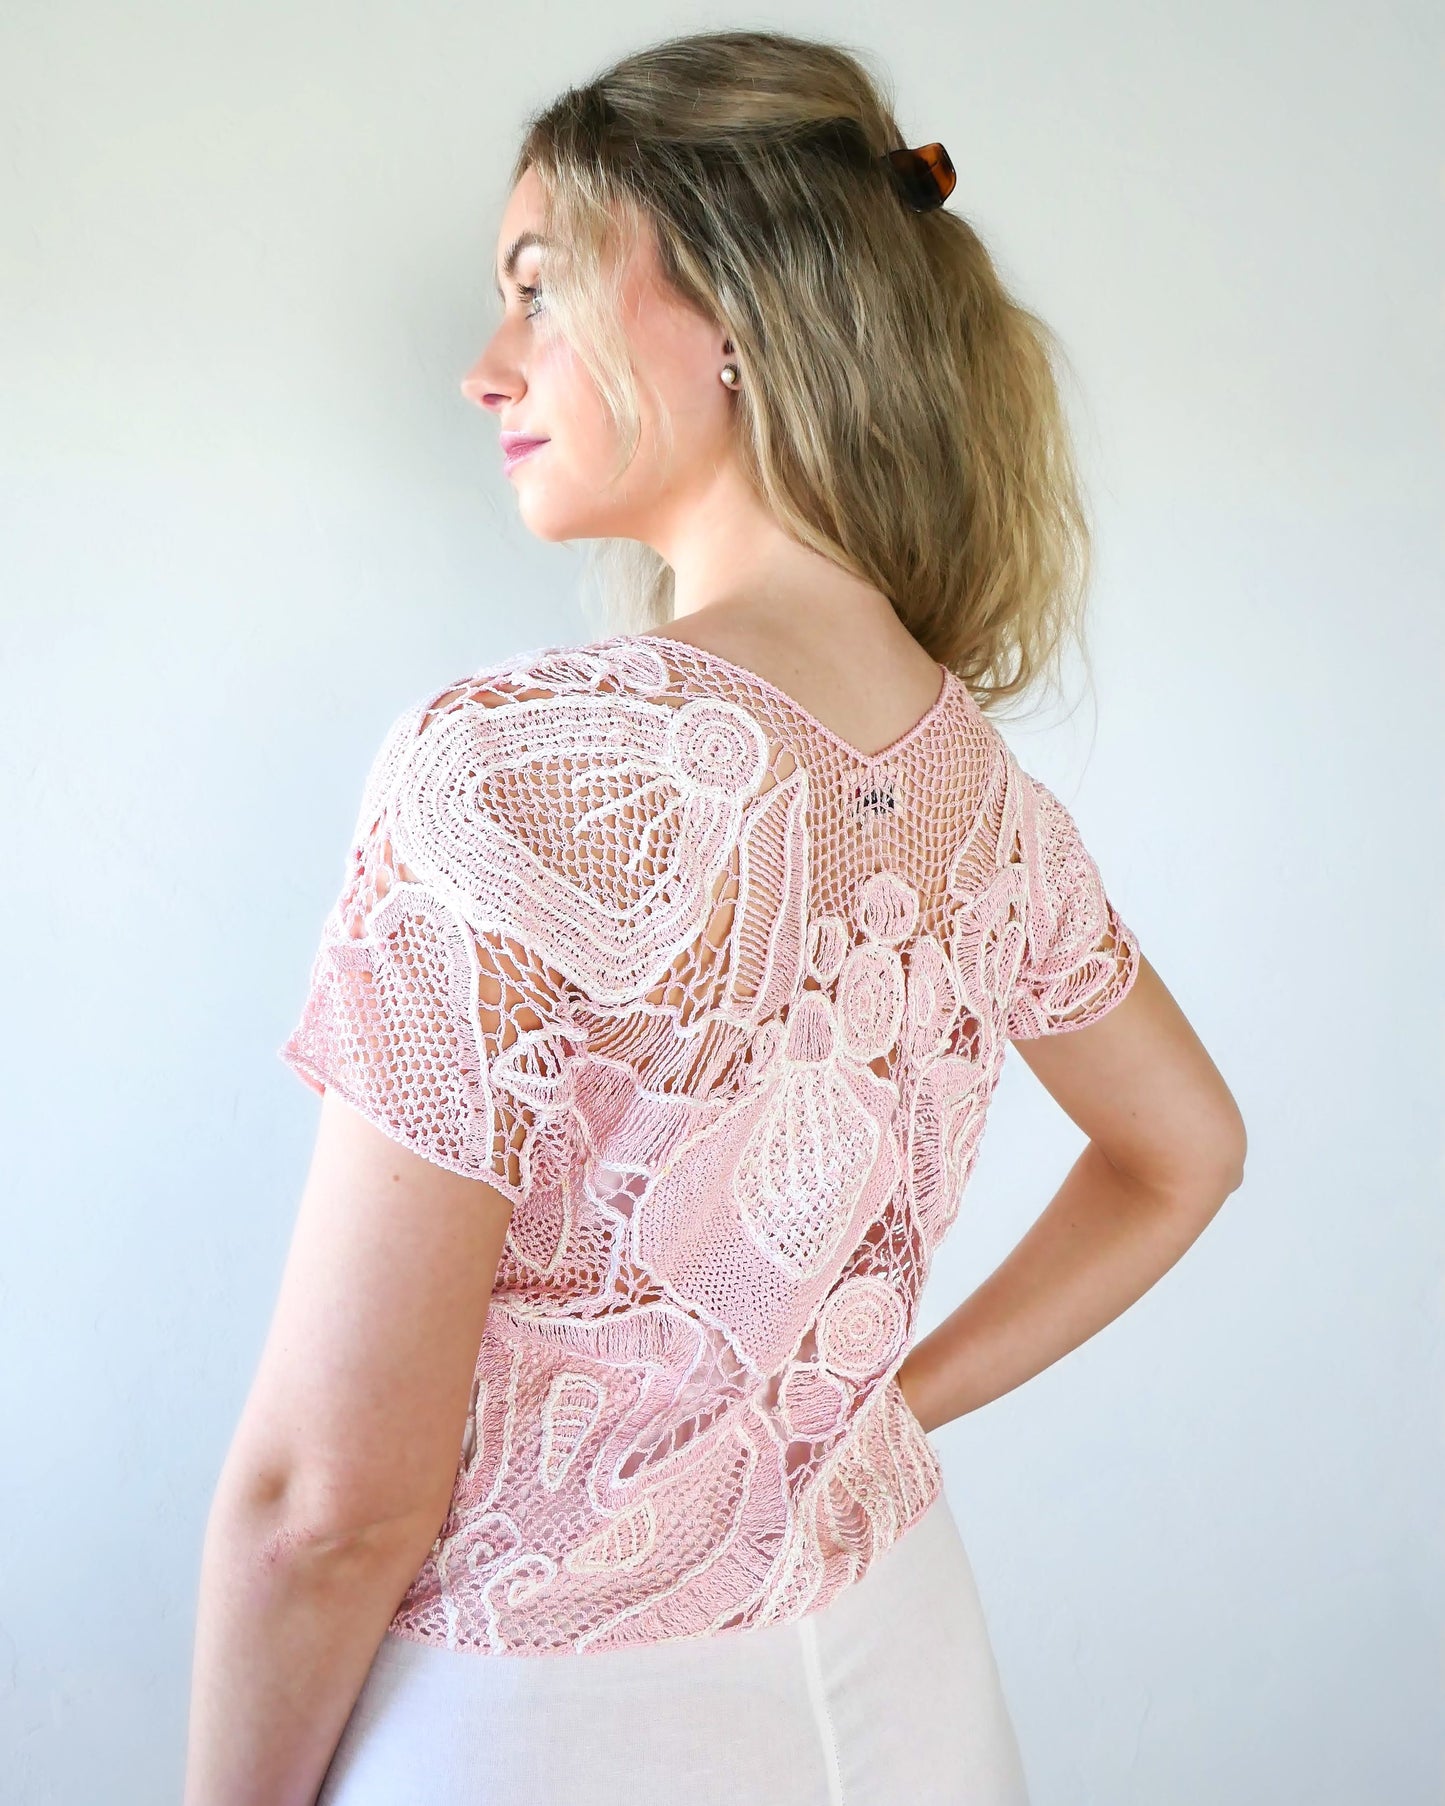 Back of view of girl wearing a crochet top with abstract flora design in colors of cotton candy pink and white. Lim's Vintage original crochet top from the 1980s. 